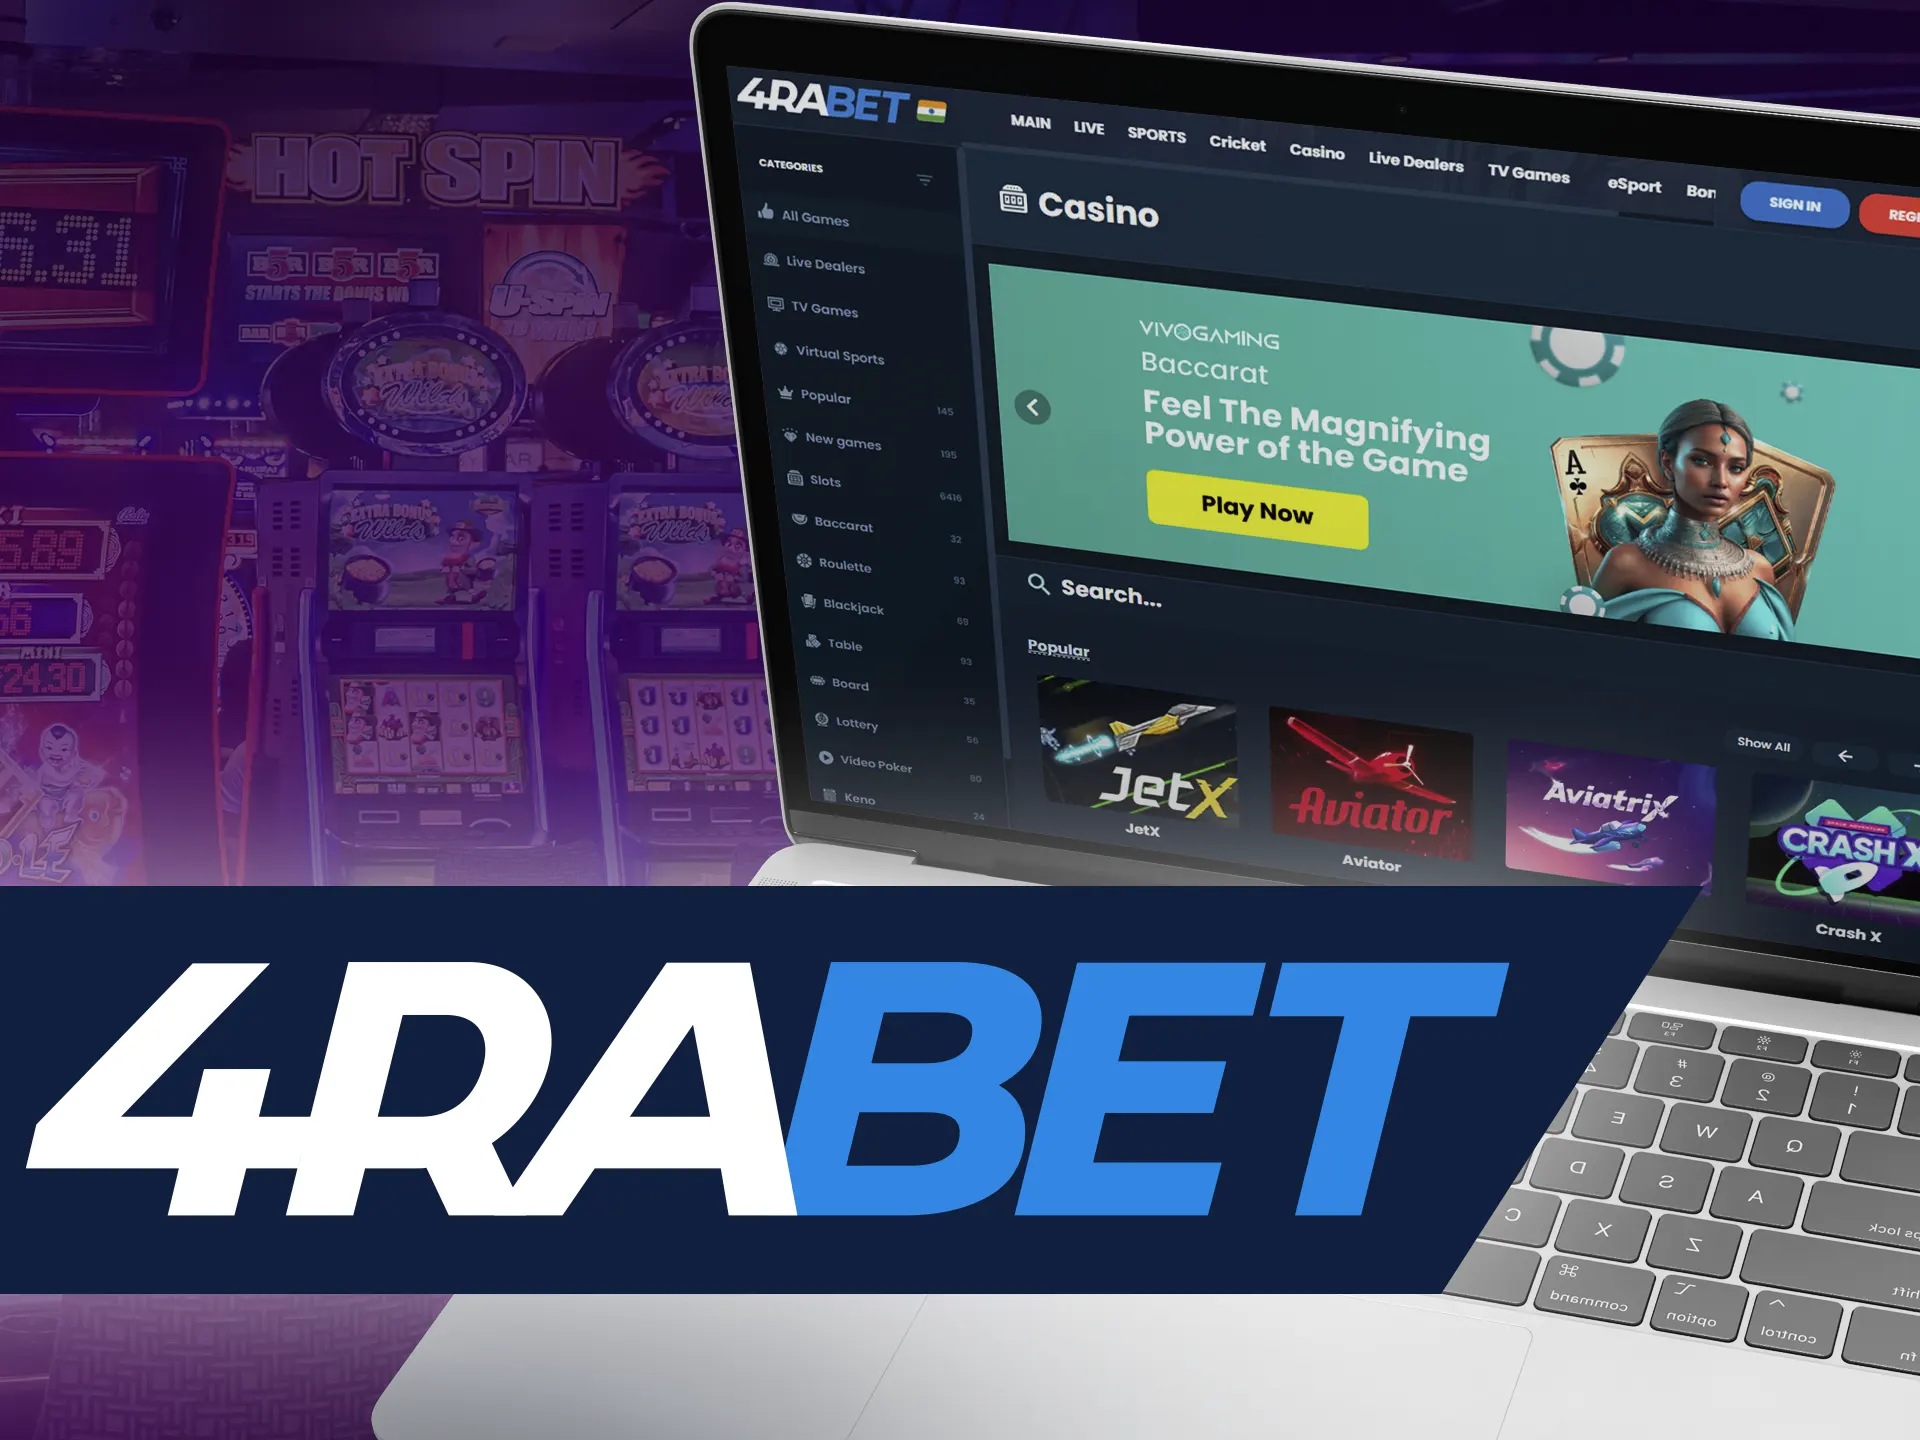 With 4rabet, dive into the world of the best slot machines.